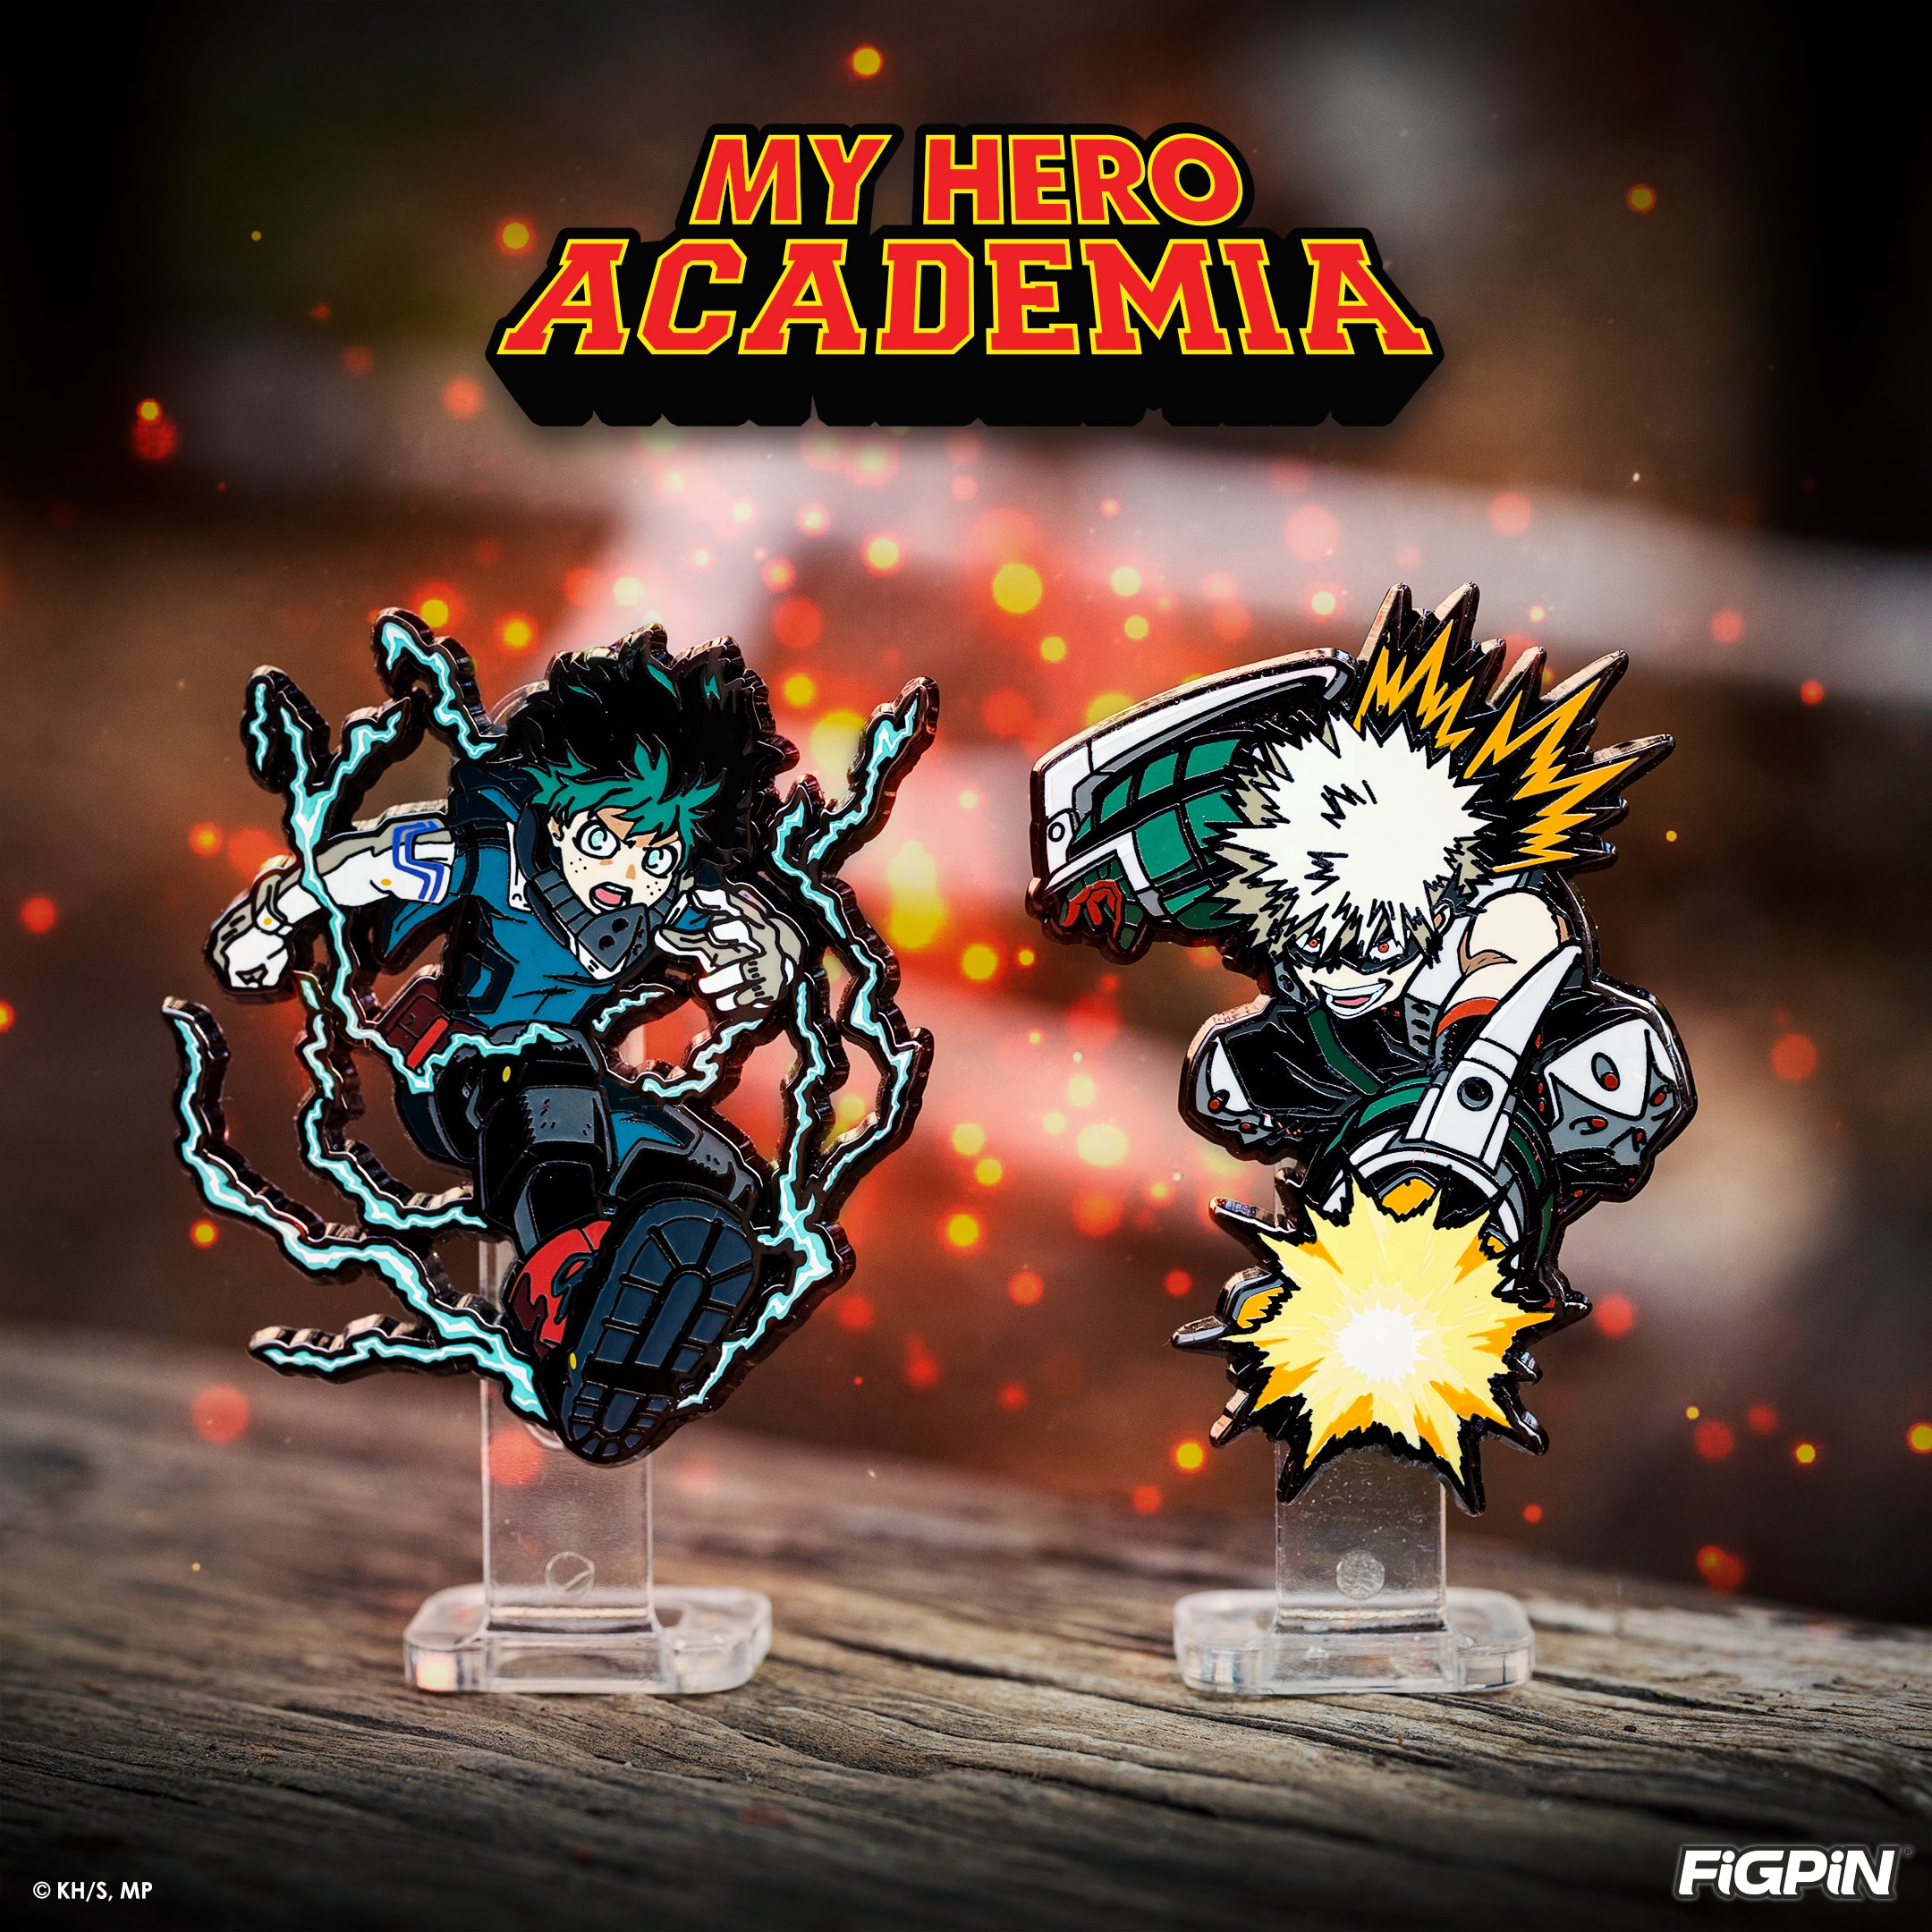 FiGPiN’s My Hero Academia offering continues to grow!